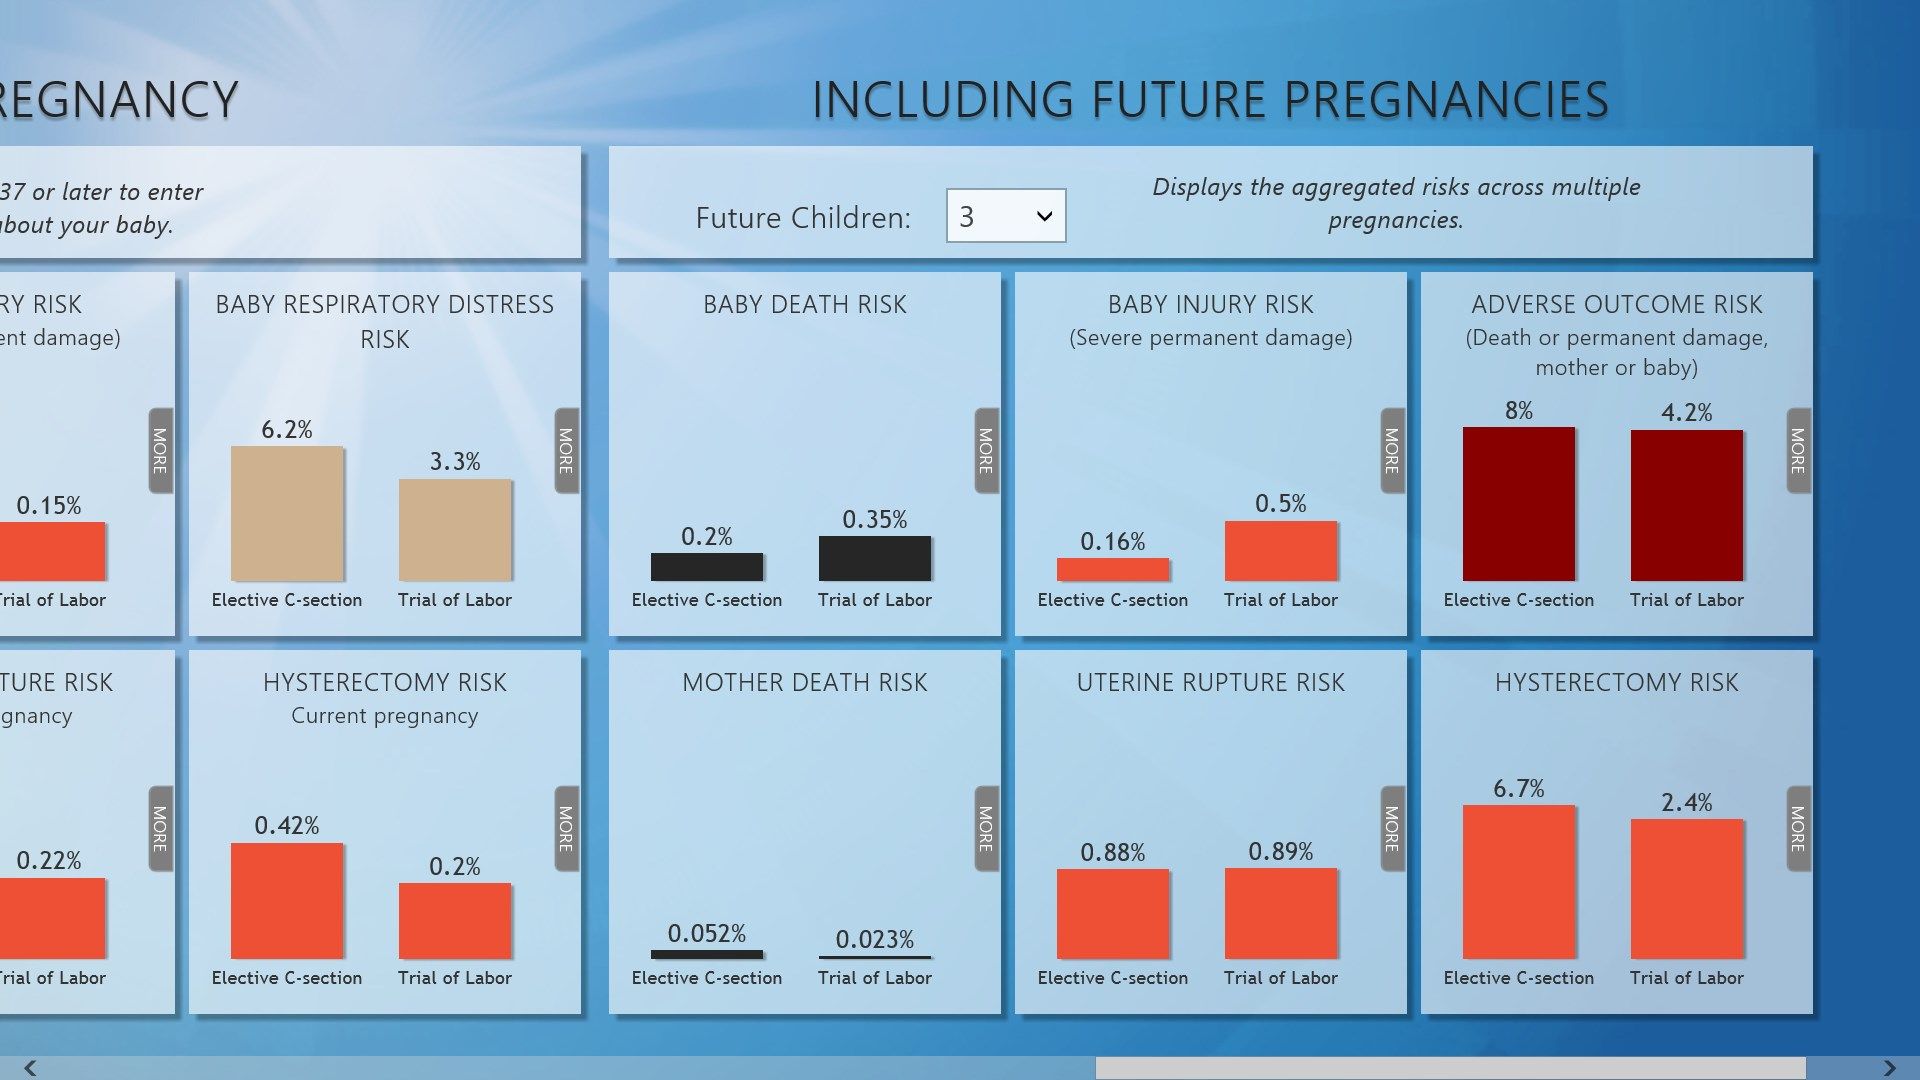 See how delivery mode affects risks in future pregnancies